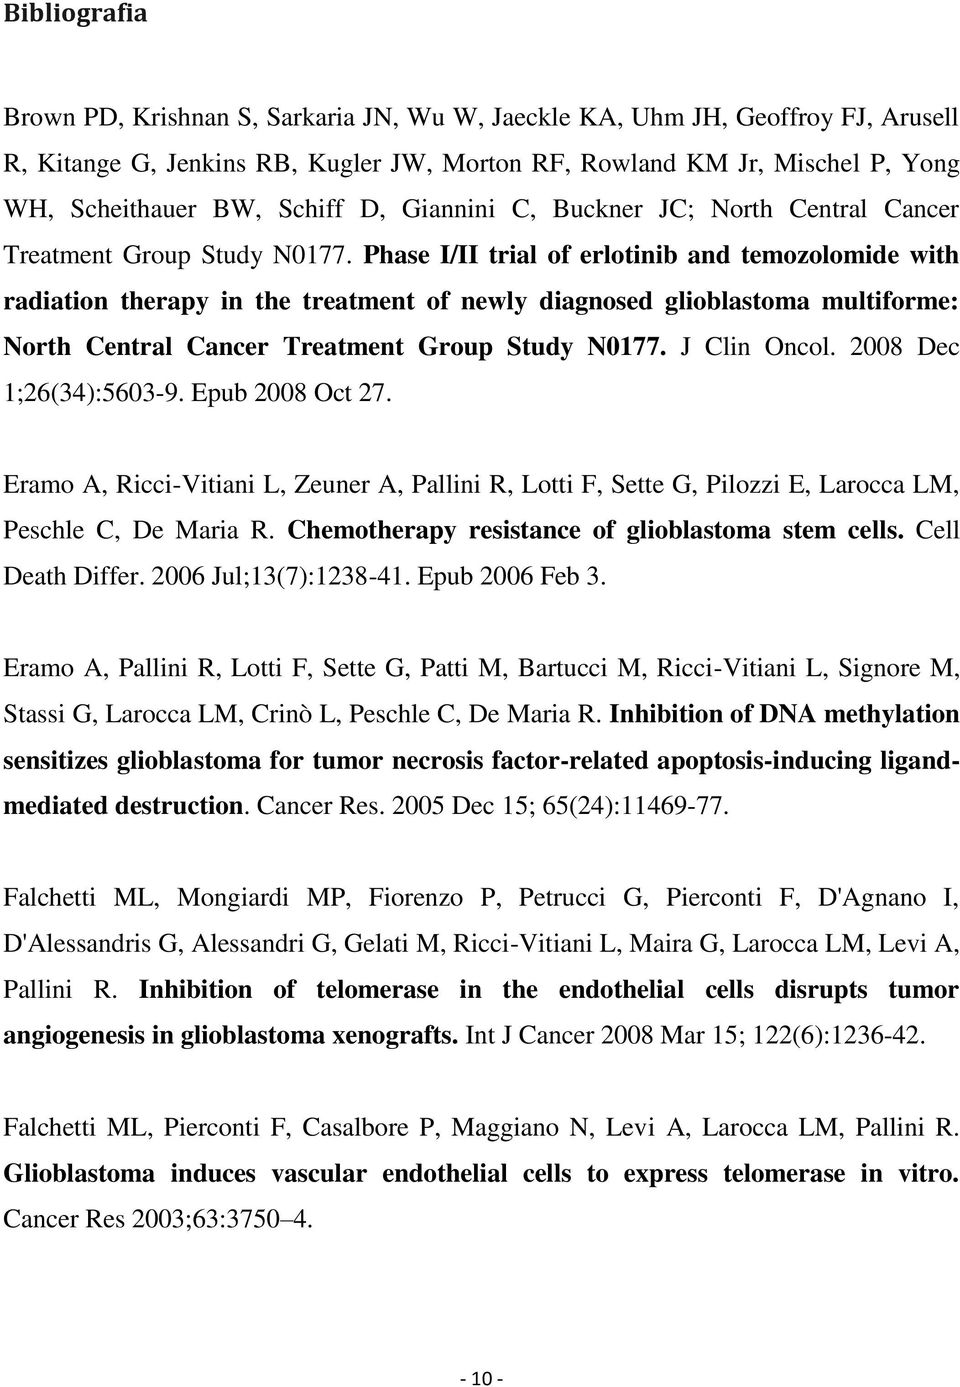 Phase I/II trial of erlotinib and temozolomide with radiation therapy in the treatment of newly diagnosed glioblastoma multiforme: North Central Cancer Treatment Group Study N0177. J Clin Oncol.